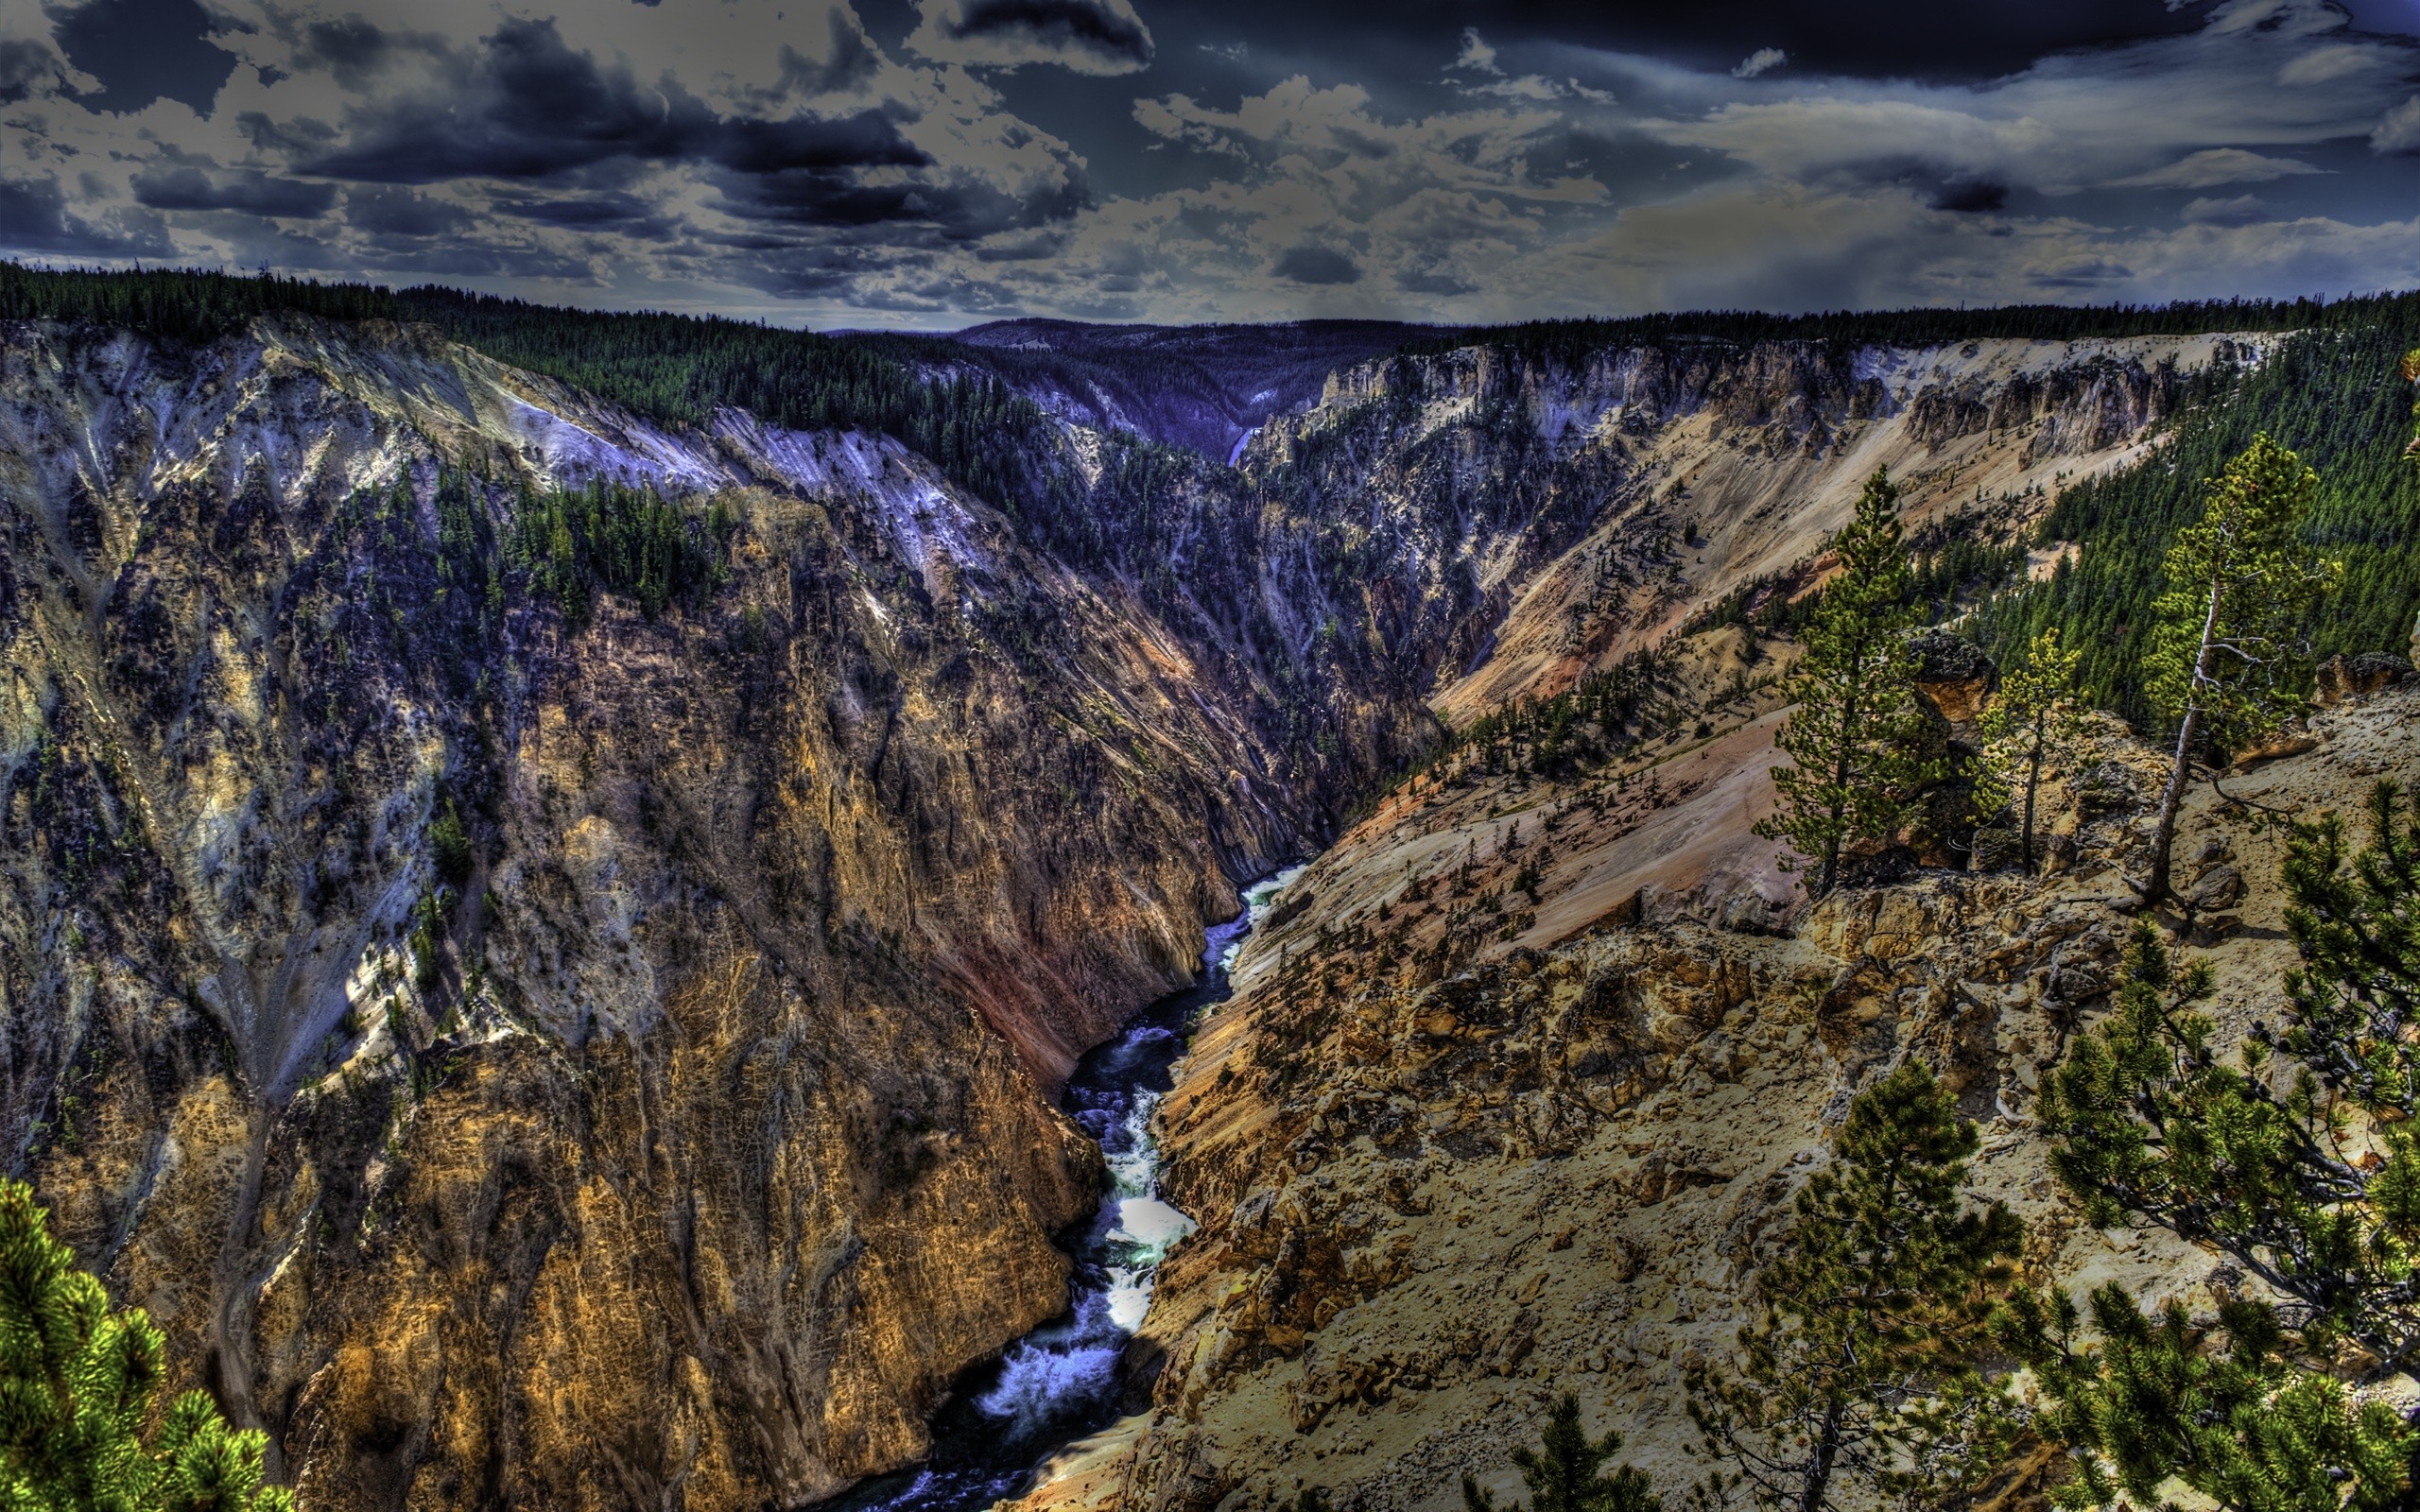 2560x1600 14 Yellowstone National Park HD Wallpapers | Backgrounds - Wallpaper Abyss